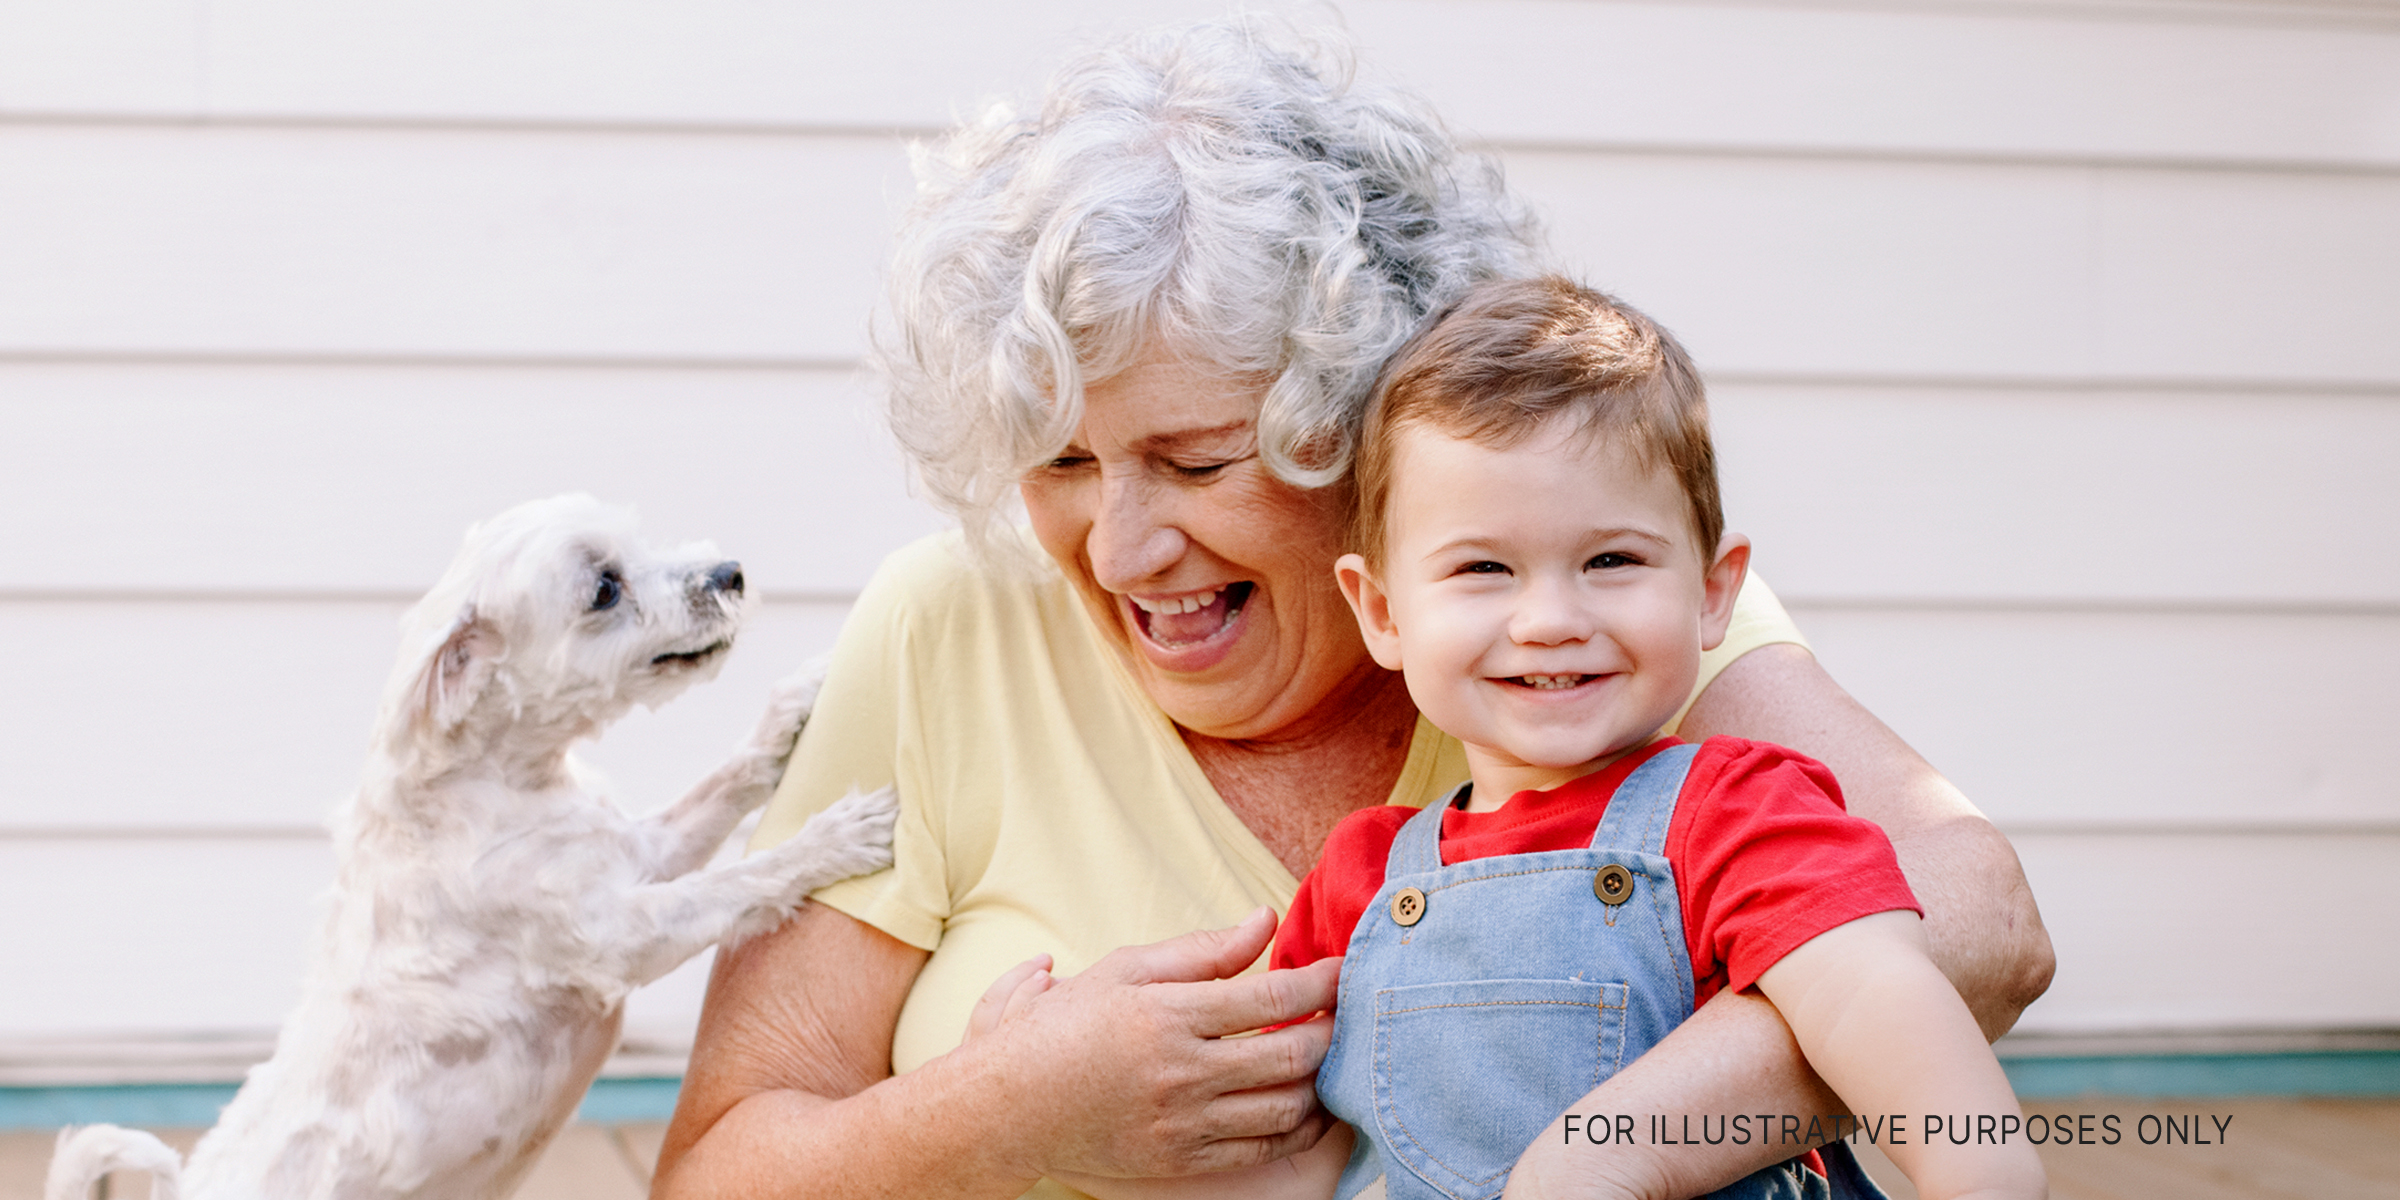 A grandmother and her grandchild with a puppy | Source: Shutterstock